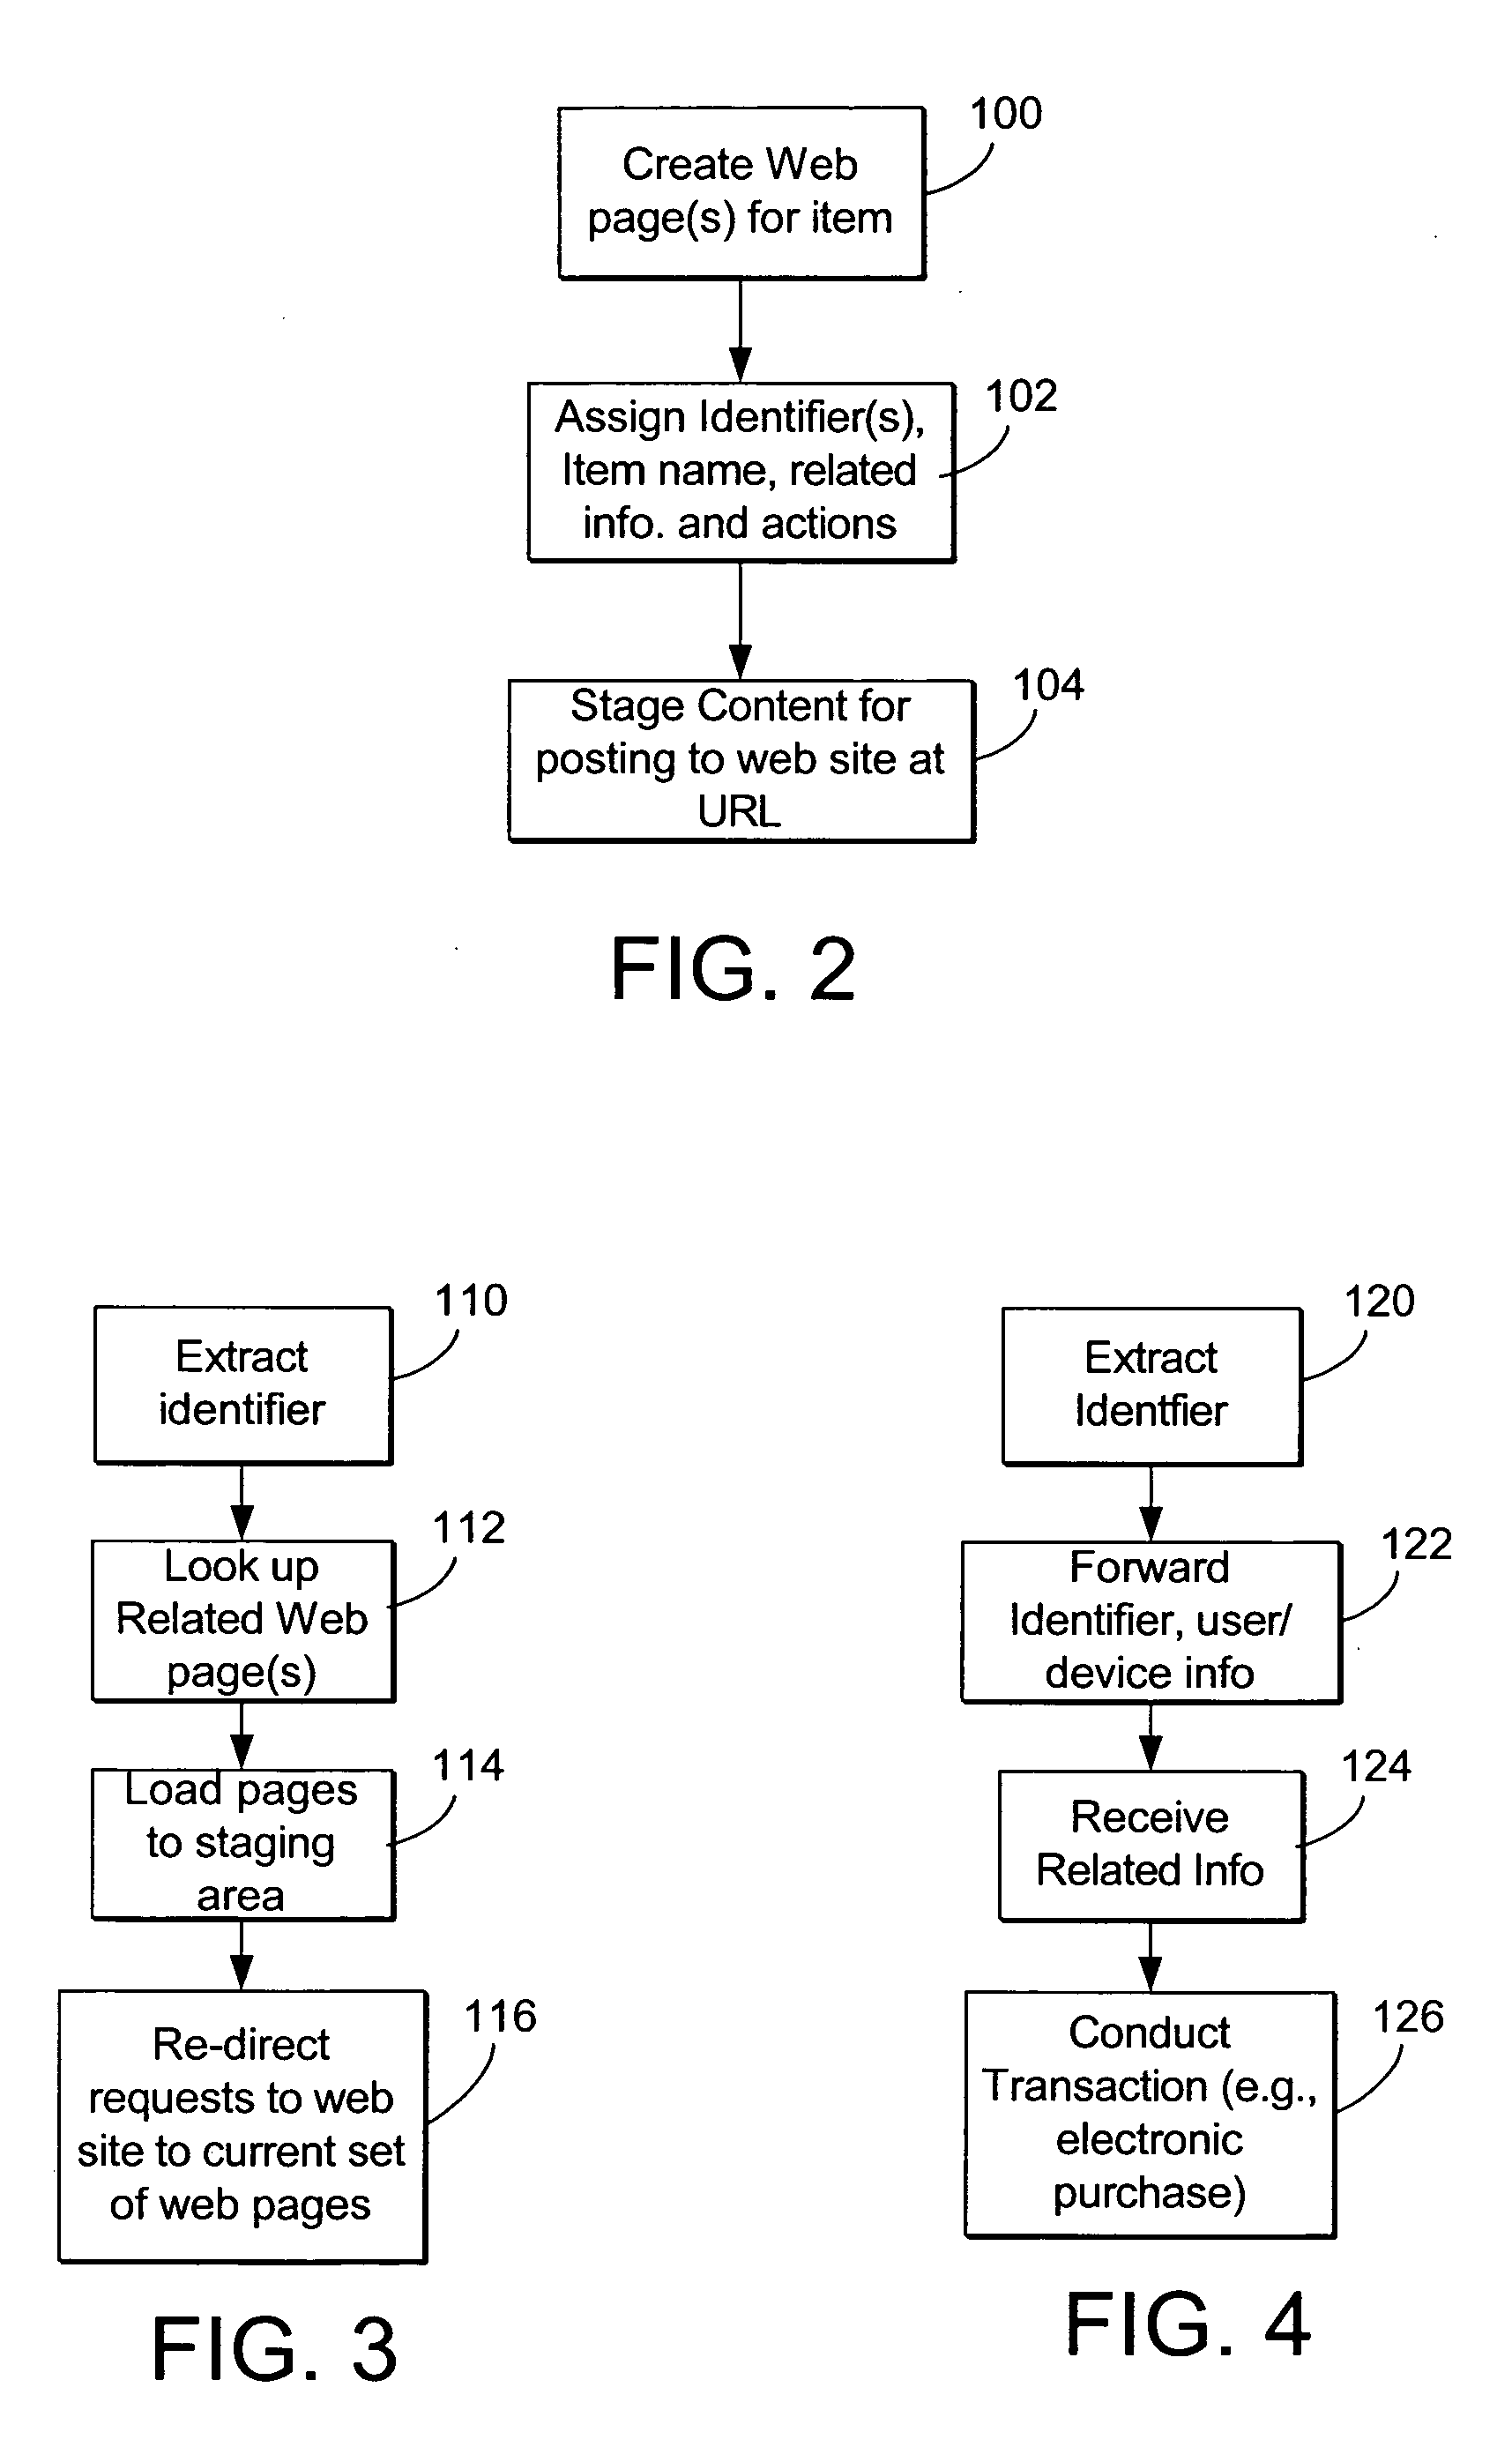 Synchronizing broadcast content with corresponding network content